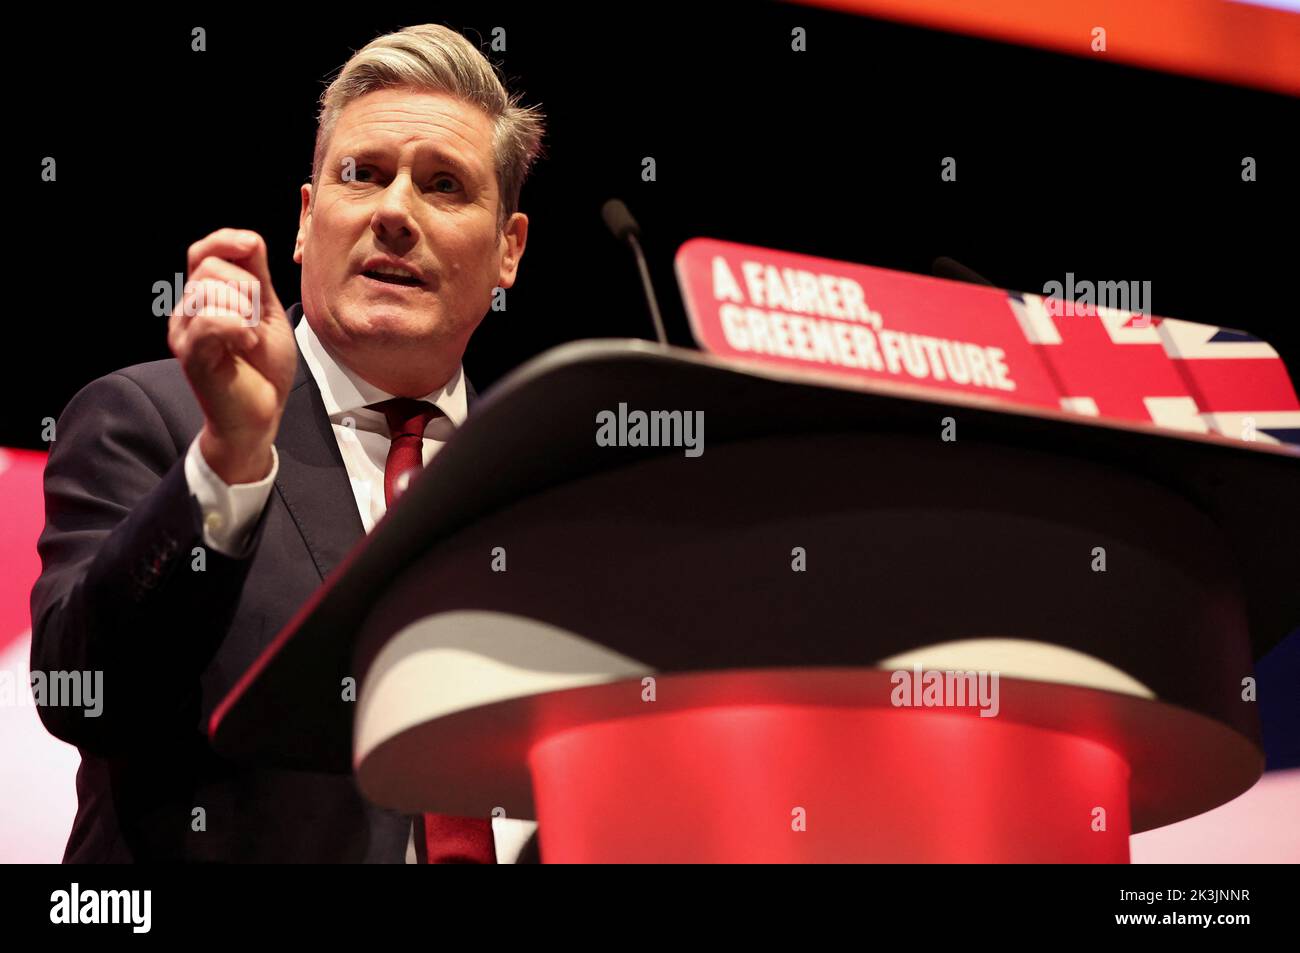 British Labour Party leader Keir Starmer speaks at the Britain's Labour Party annual conference in Liverpool, Britain, September 27, 2022. REUTERS/Phil Noble Stock Photo